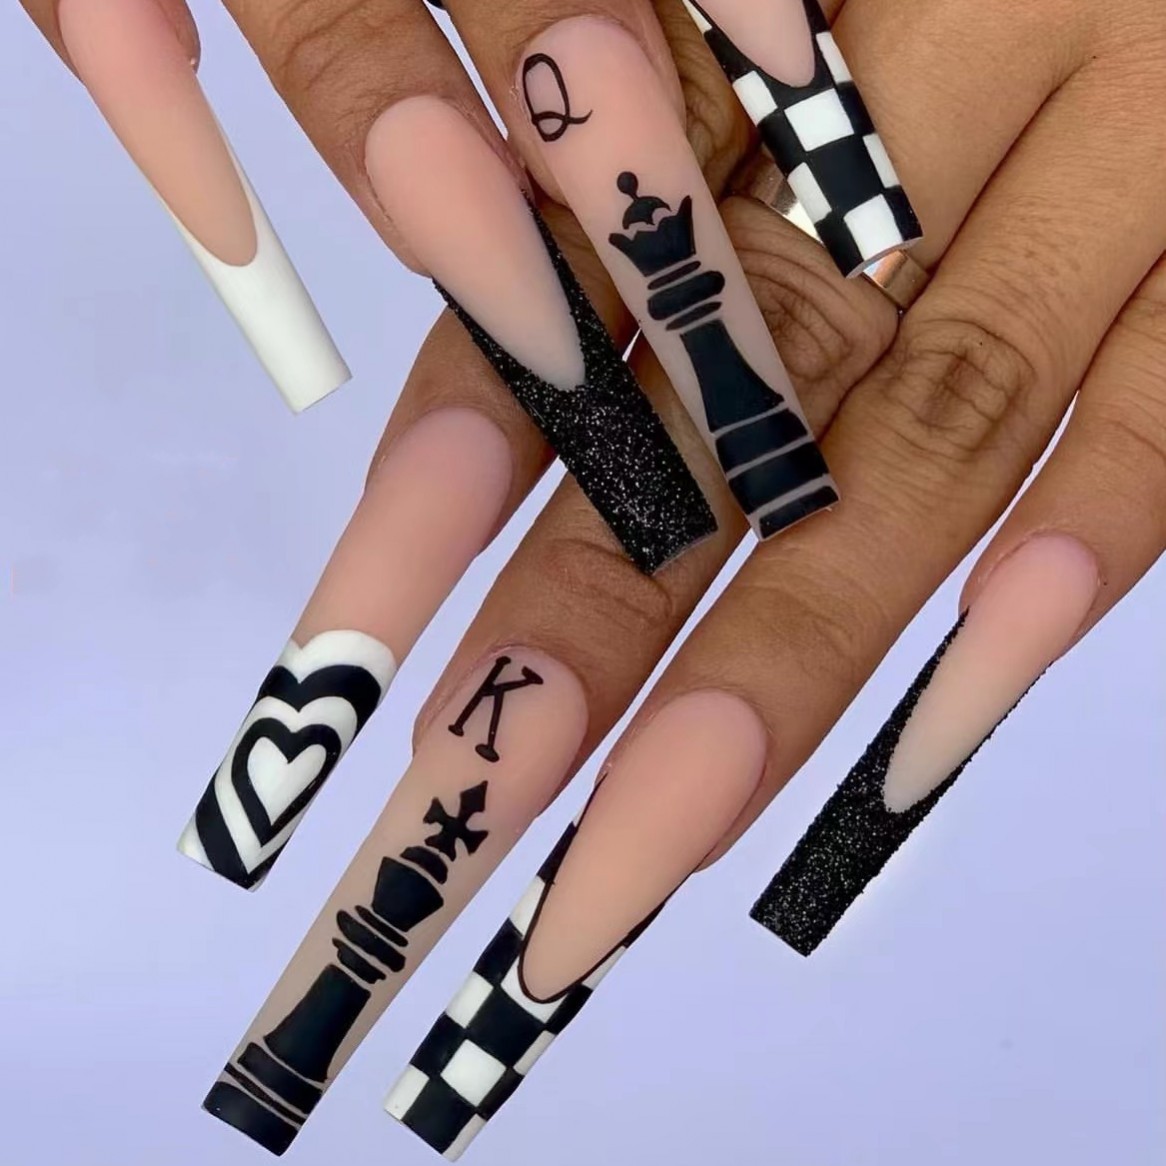 Can Artificial Nails Transform Your Look?